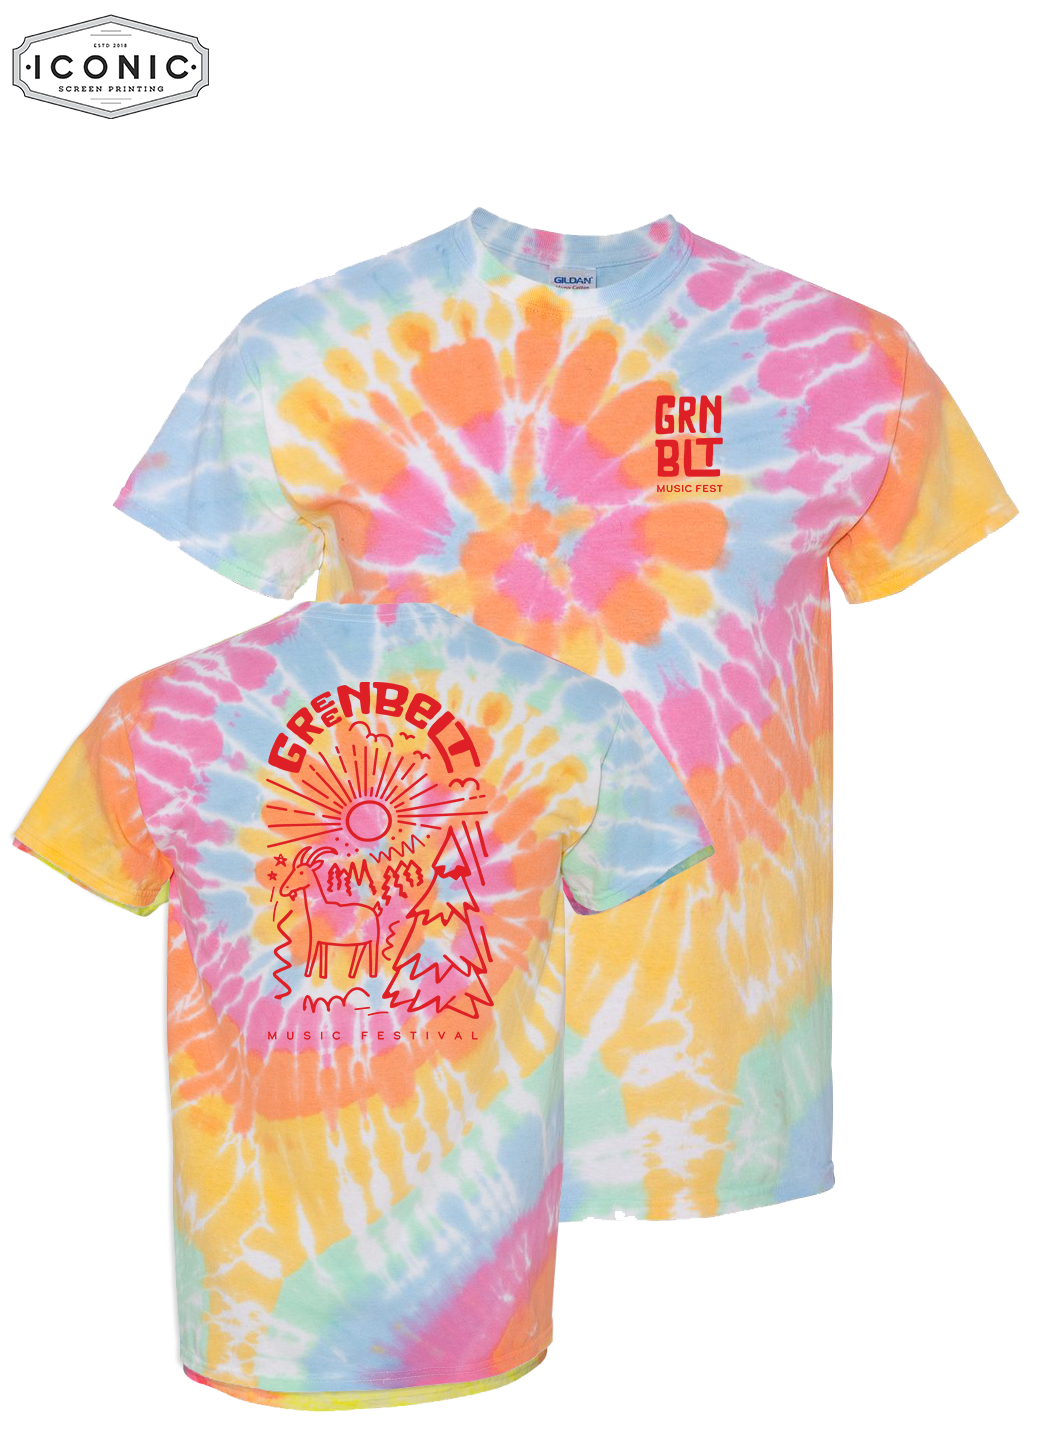 Greenbelt Music Festival - Multi-Color Spiral Tie-Dyed T-Shirt